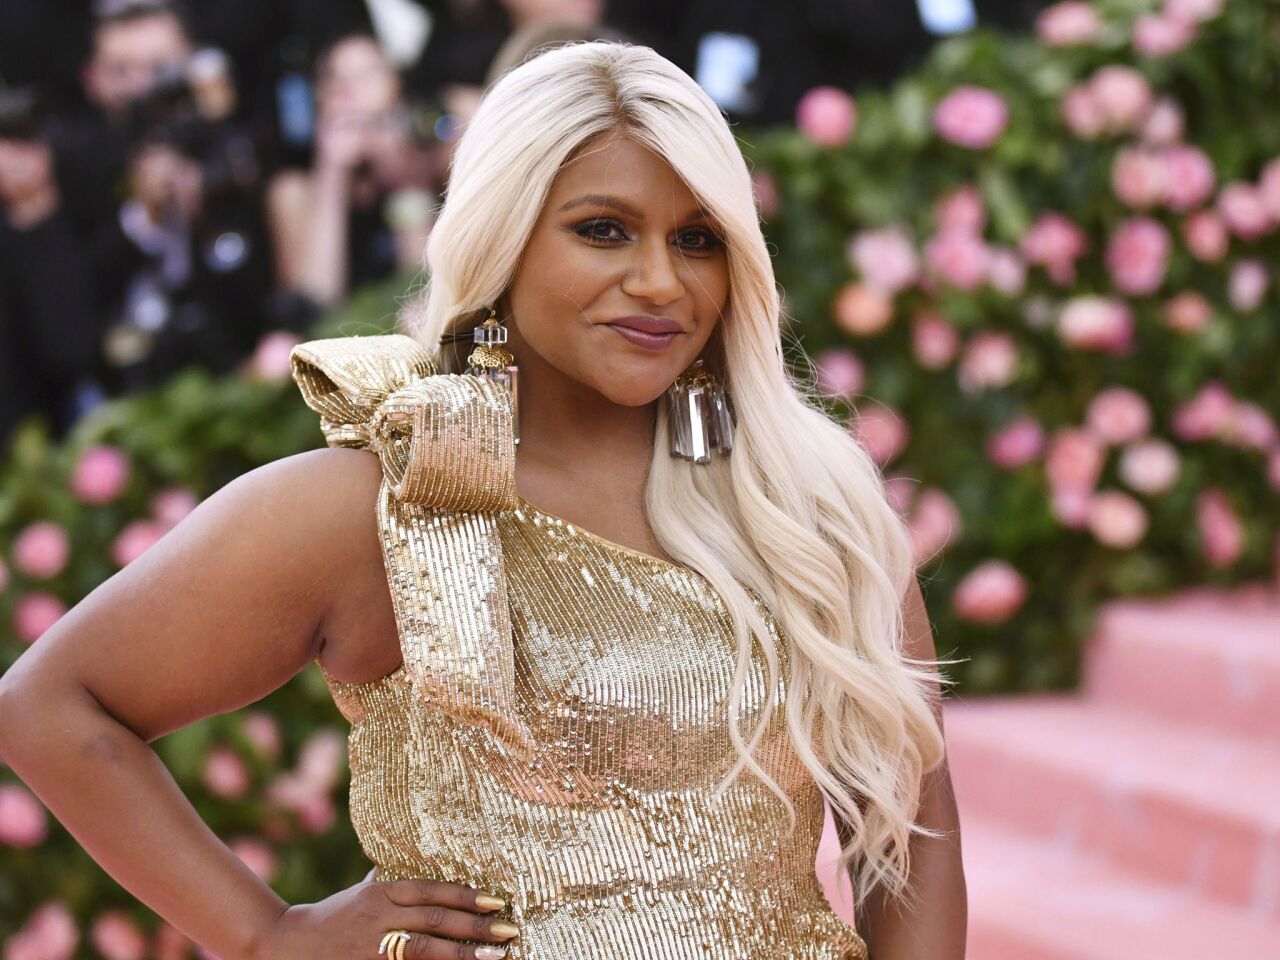 Mindy Kaling goes platinum blond for the Costume Institute benefit.